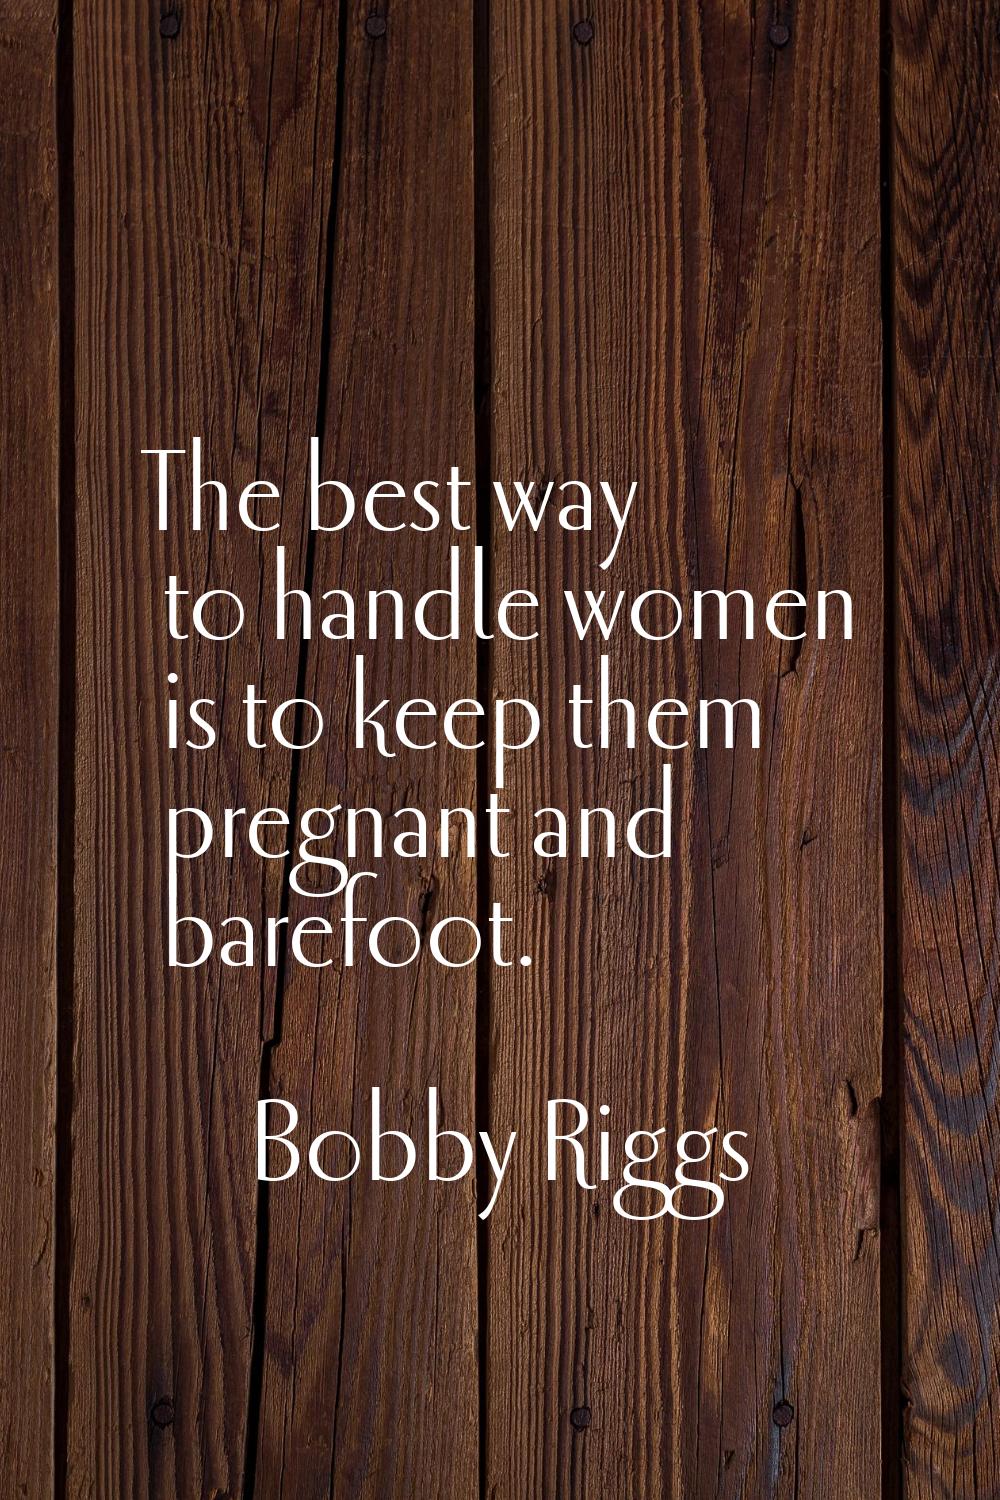 The best way to handle women is to keep them pregnant and barefoot.